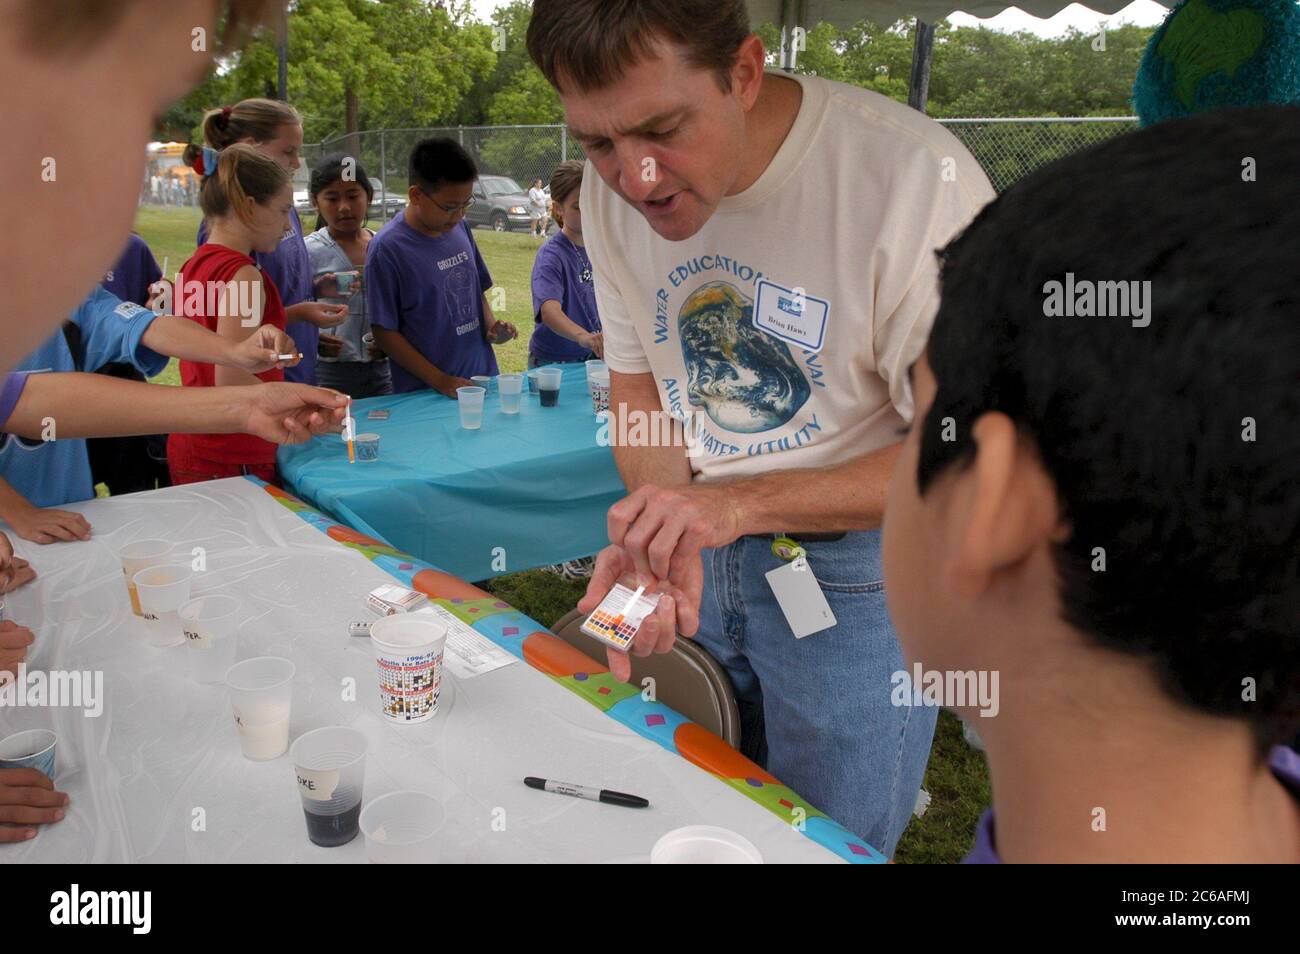 Austin Texas USA, April, 2004: Middle school students 6th and 7th grade learn about water and wastewater issues at City of Austin-sponsored Blue Thumb outdoor science event. Male instructor shows students how to test the pH of various liquids by using litmus paper. ©Bob Daemmrich Stock Photo